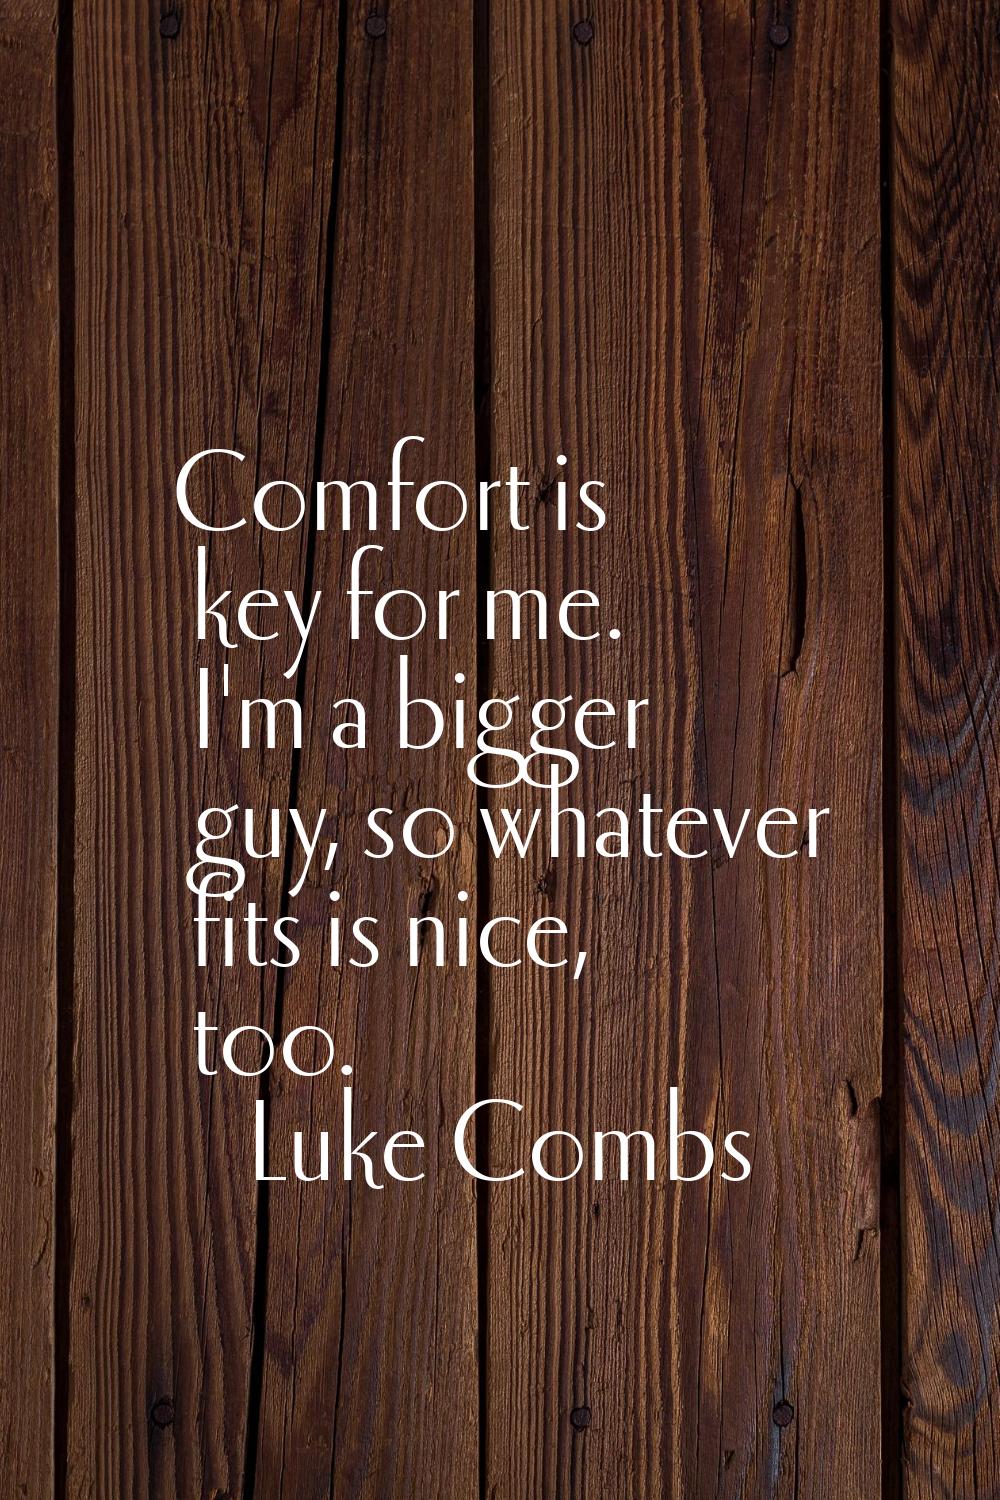 Comfort is key for me. I'm a bigger guy, so whatever fits is nice, too.